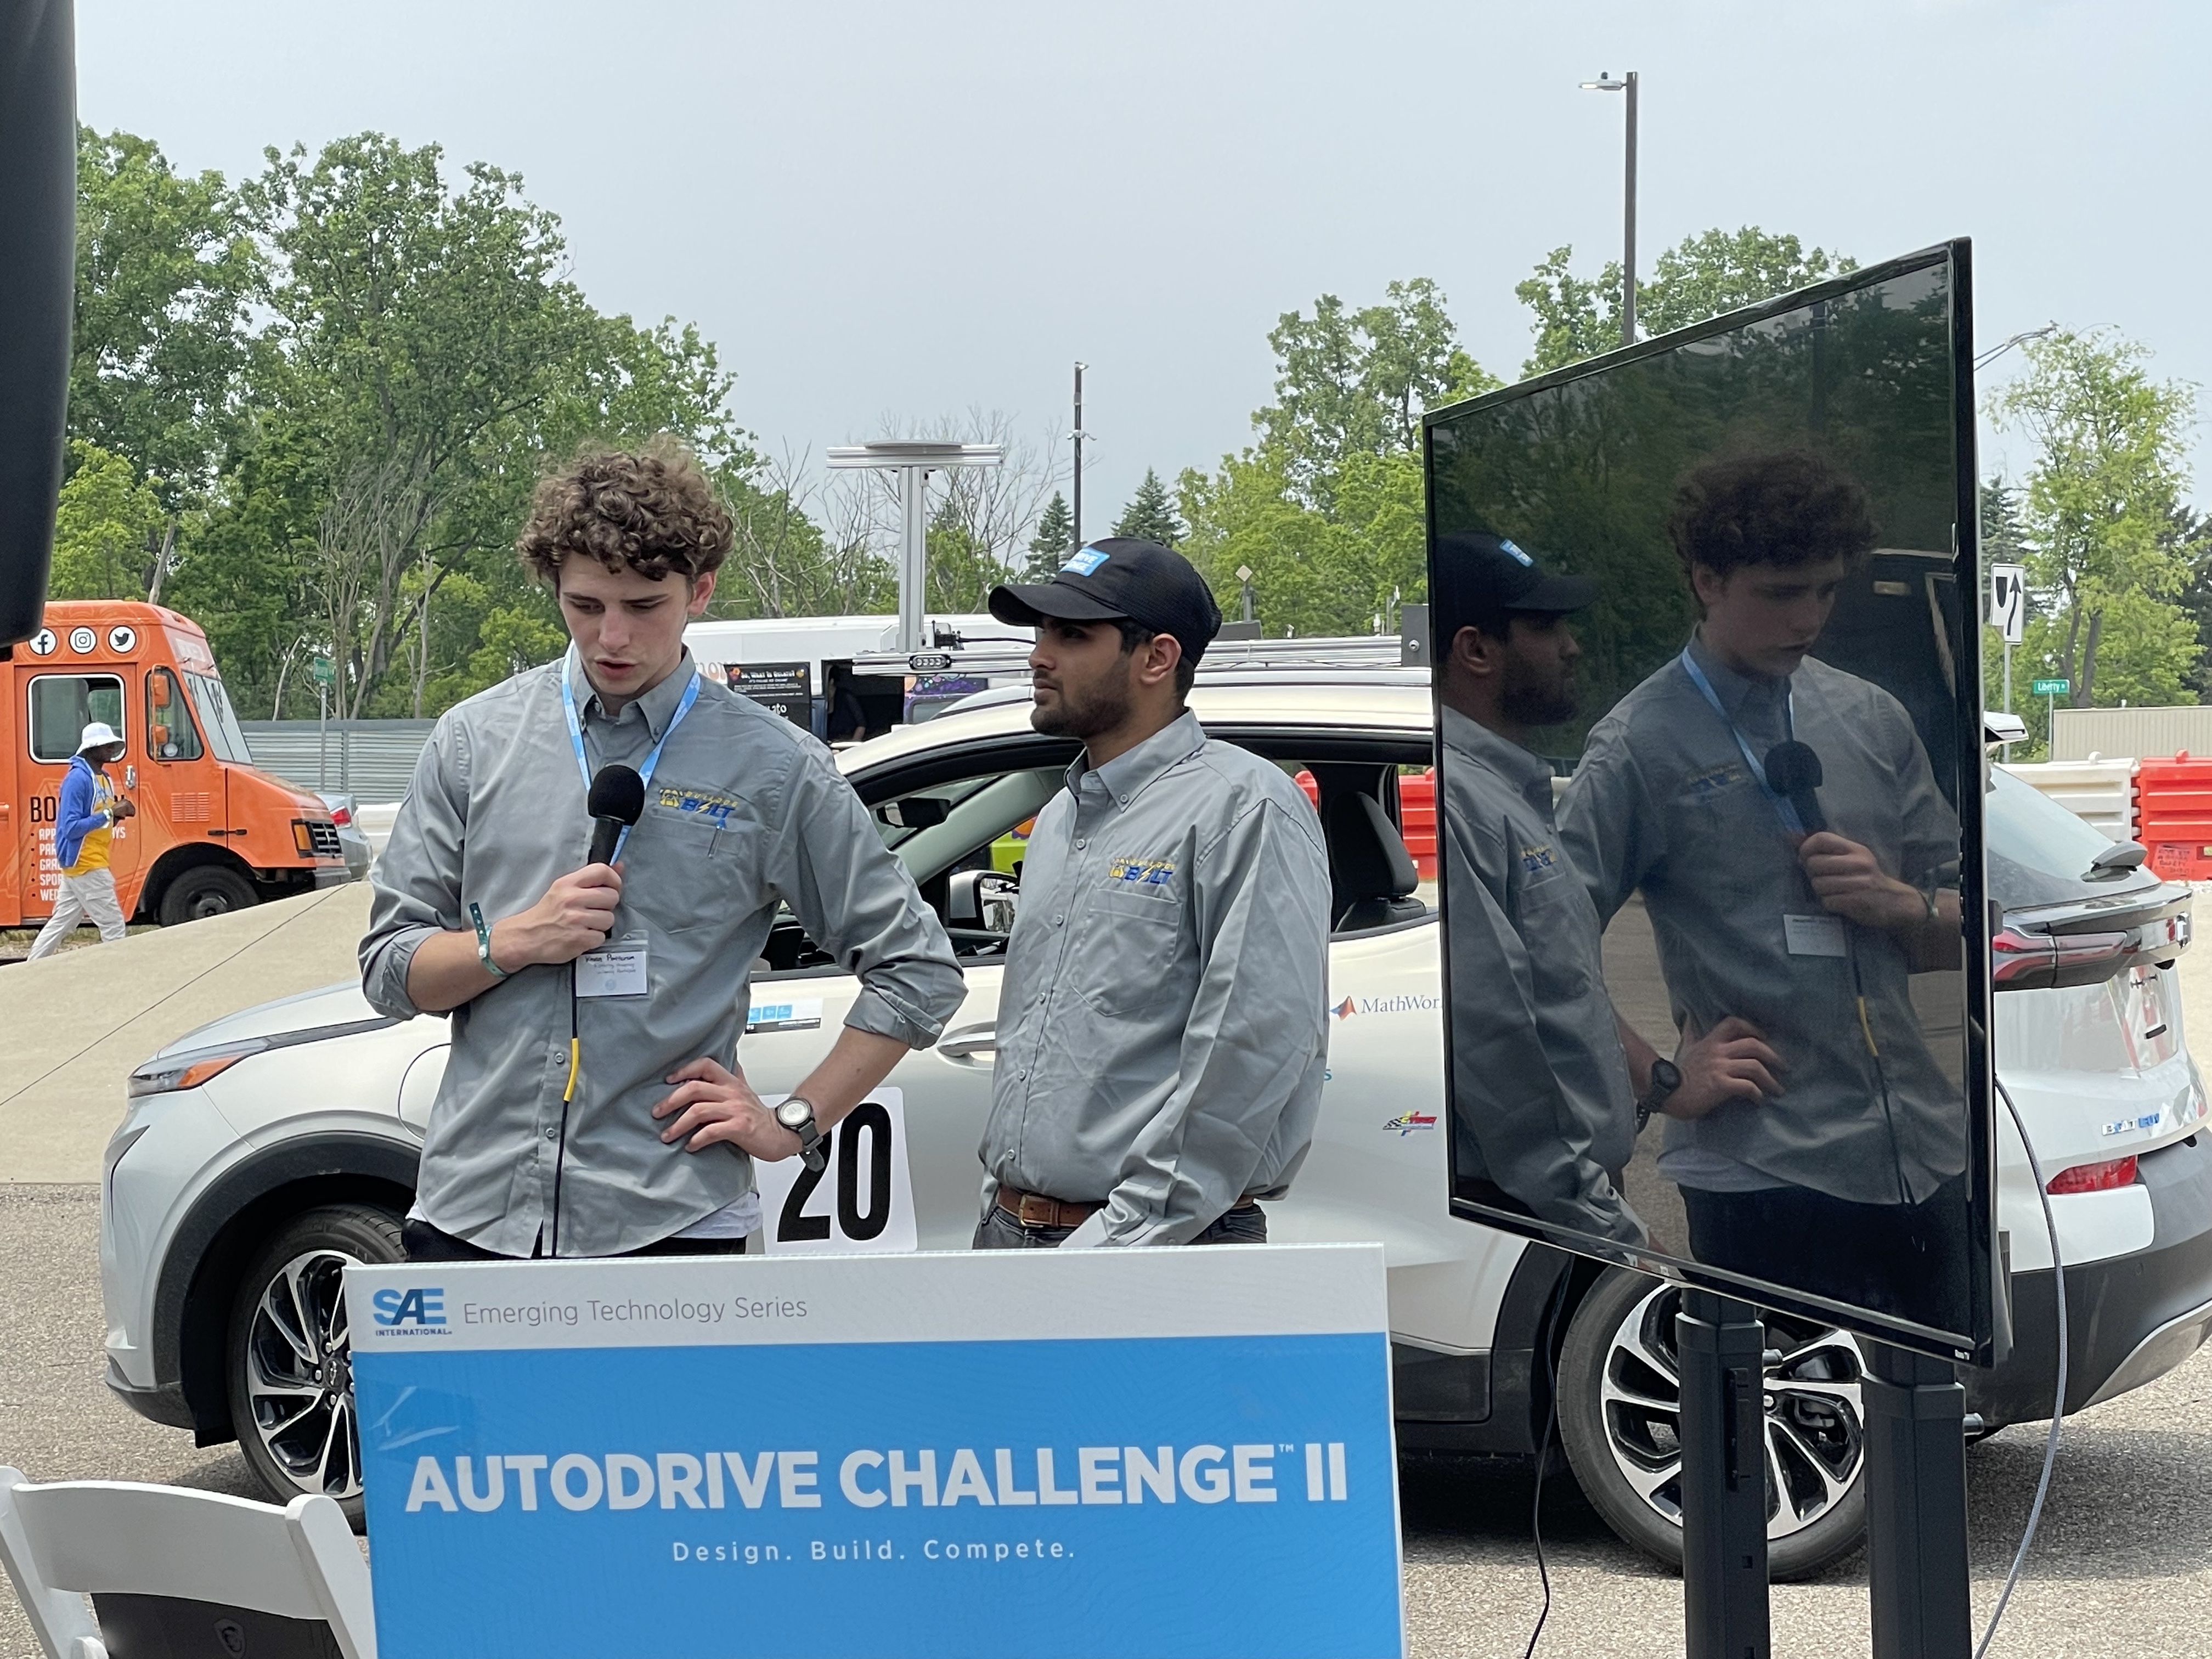 Kettering University students give a presentation at the AutoDrive II Challenge.